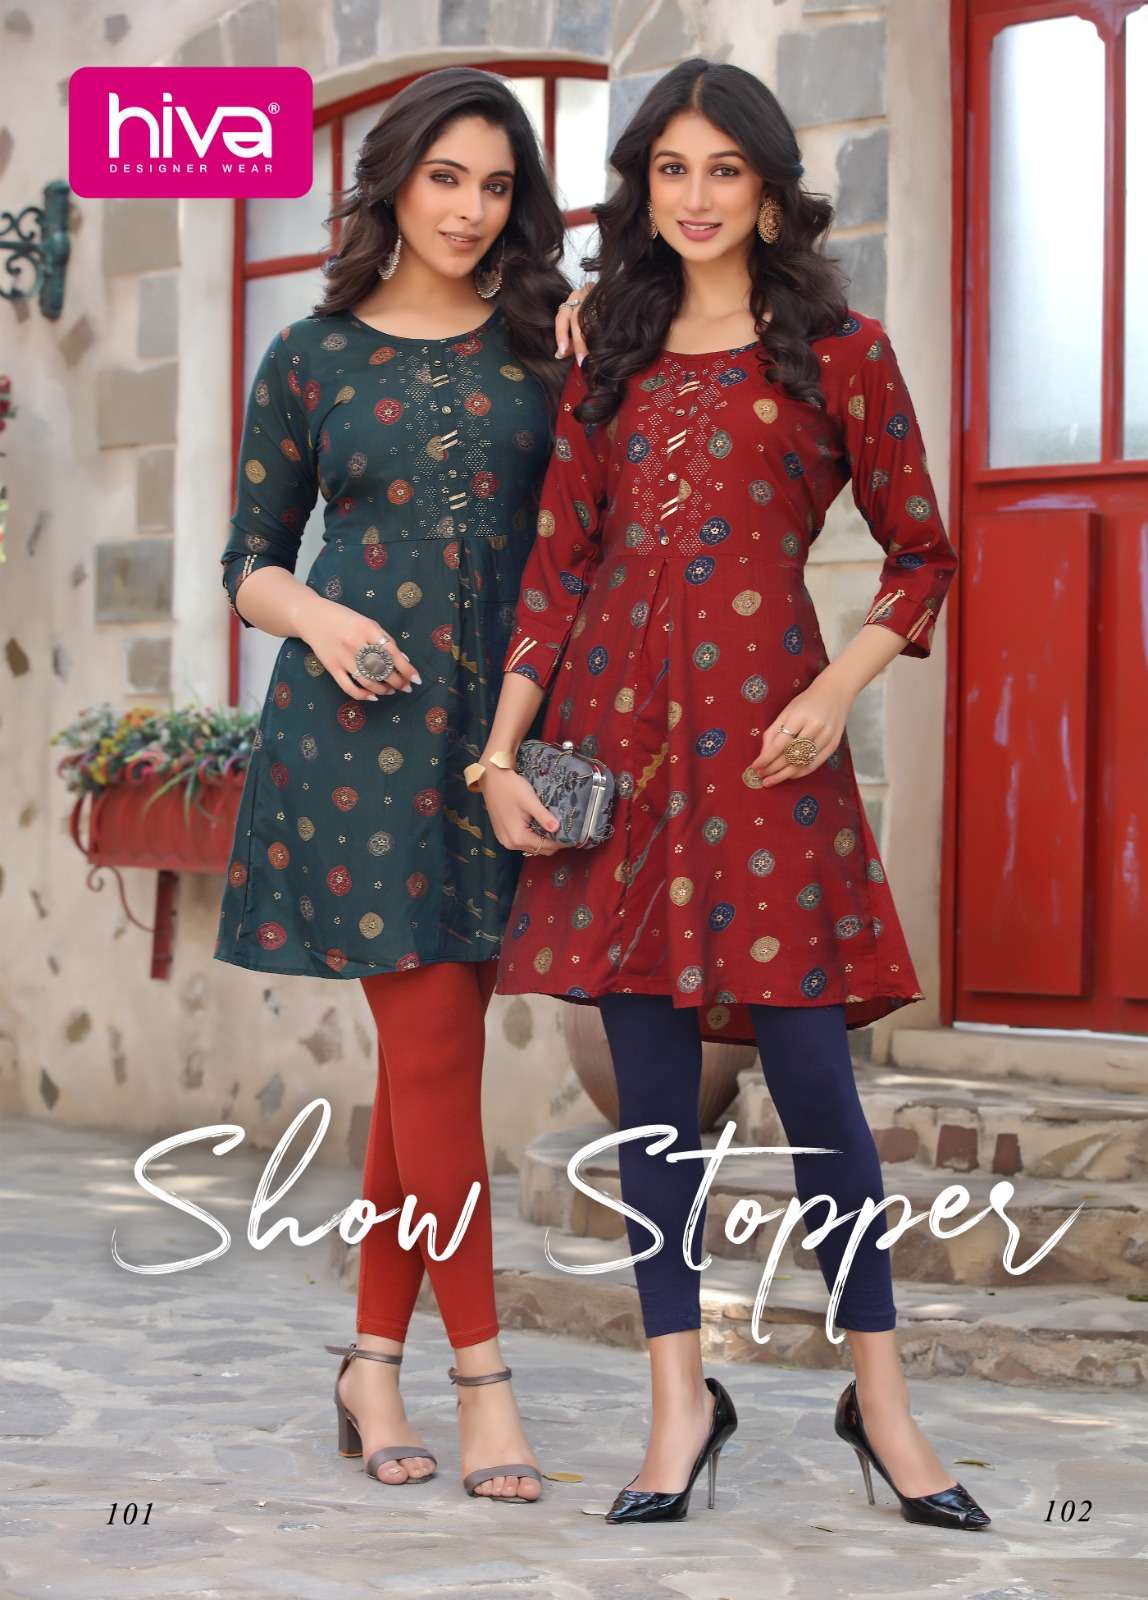 hiva designer present show stopper collection of ethnic tunic tops